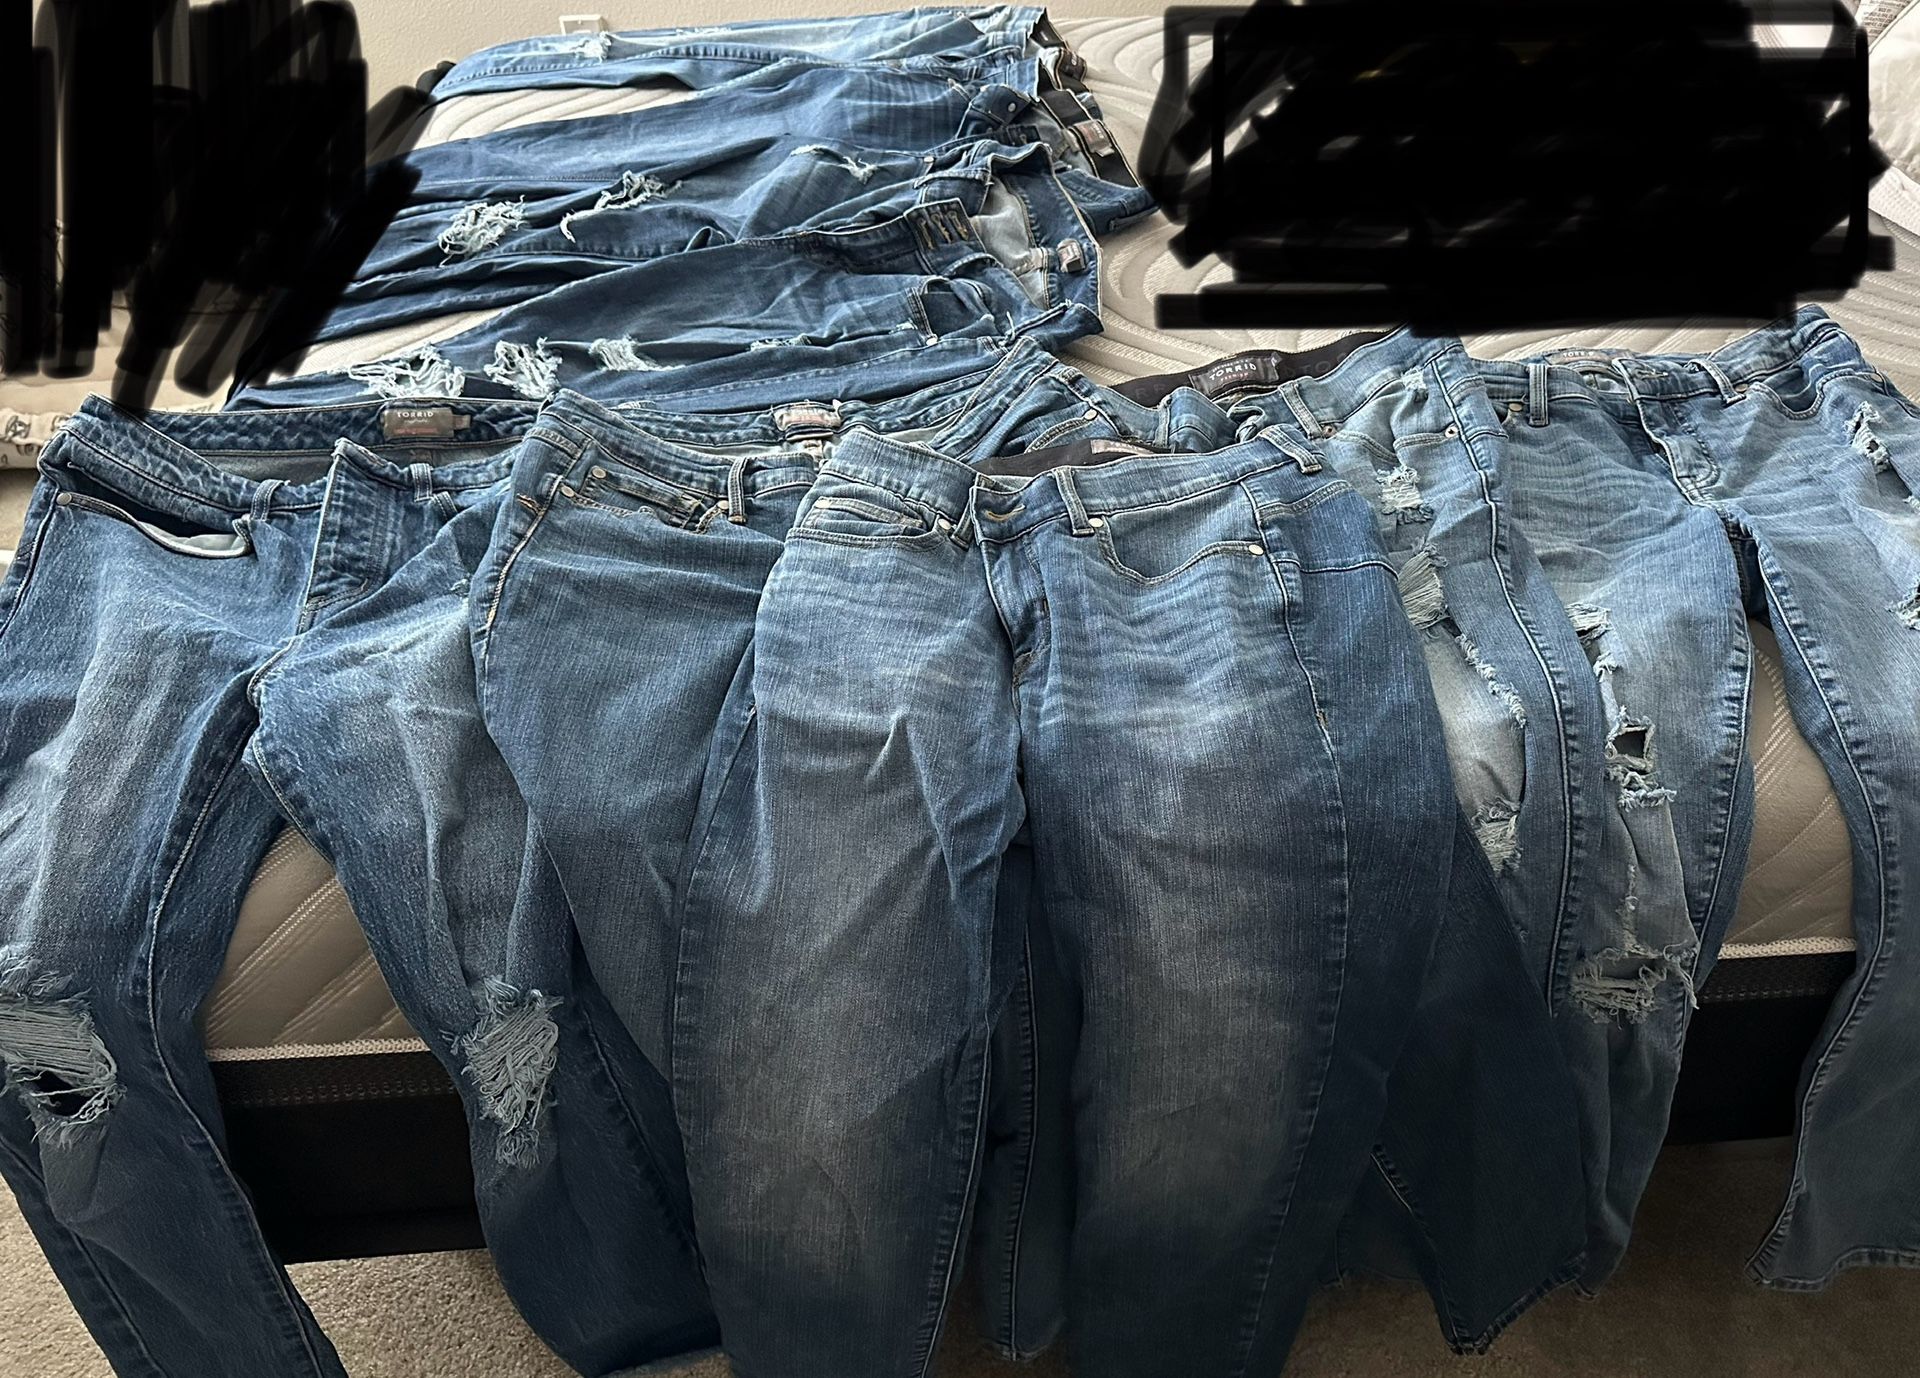 Torrid Jeans 8 Pairs $60 For All. 